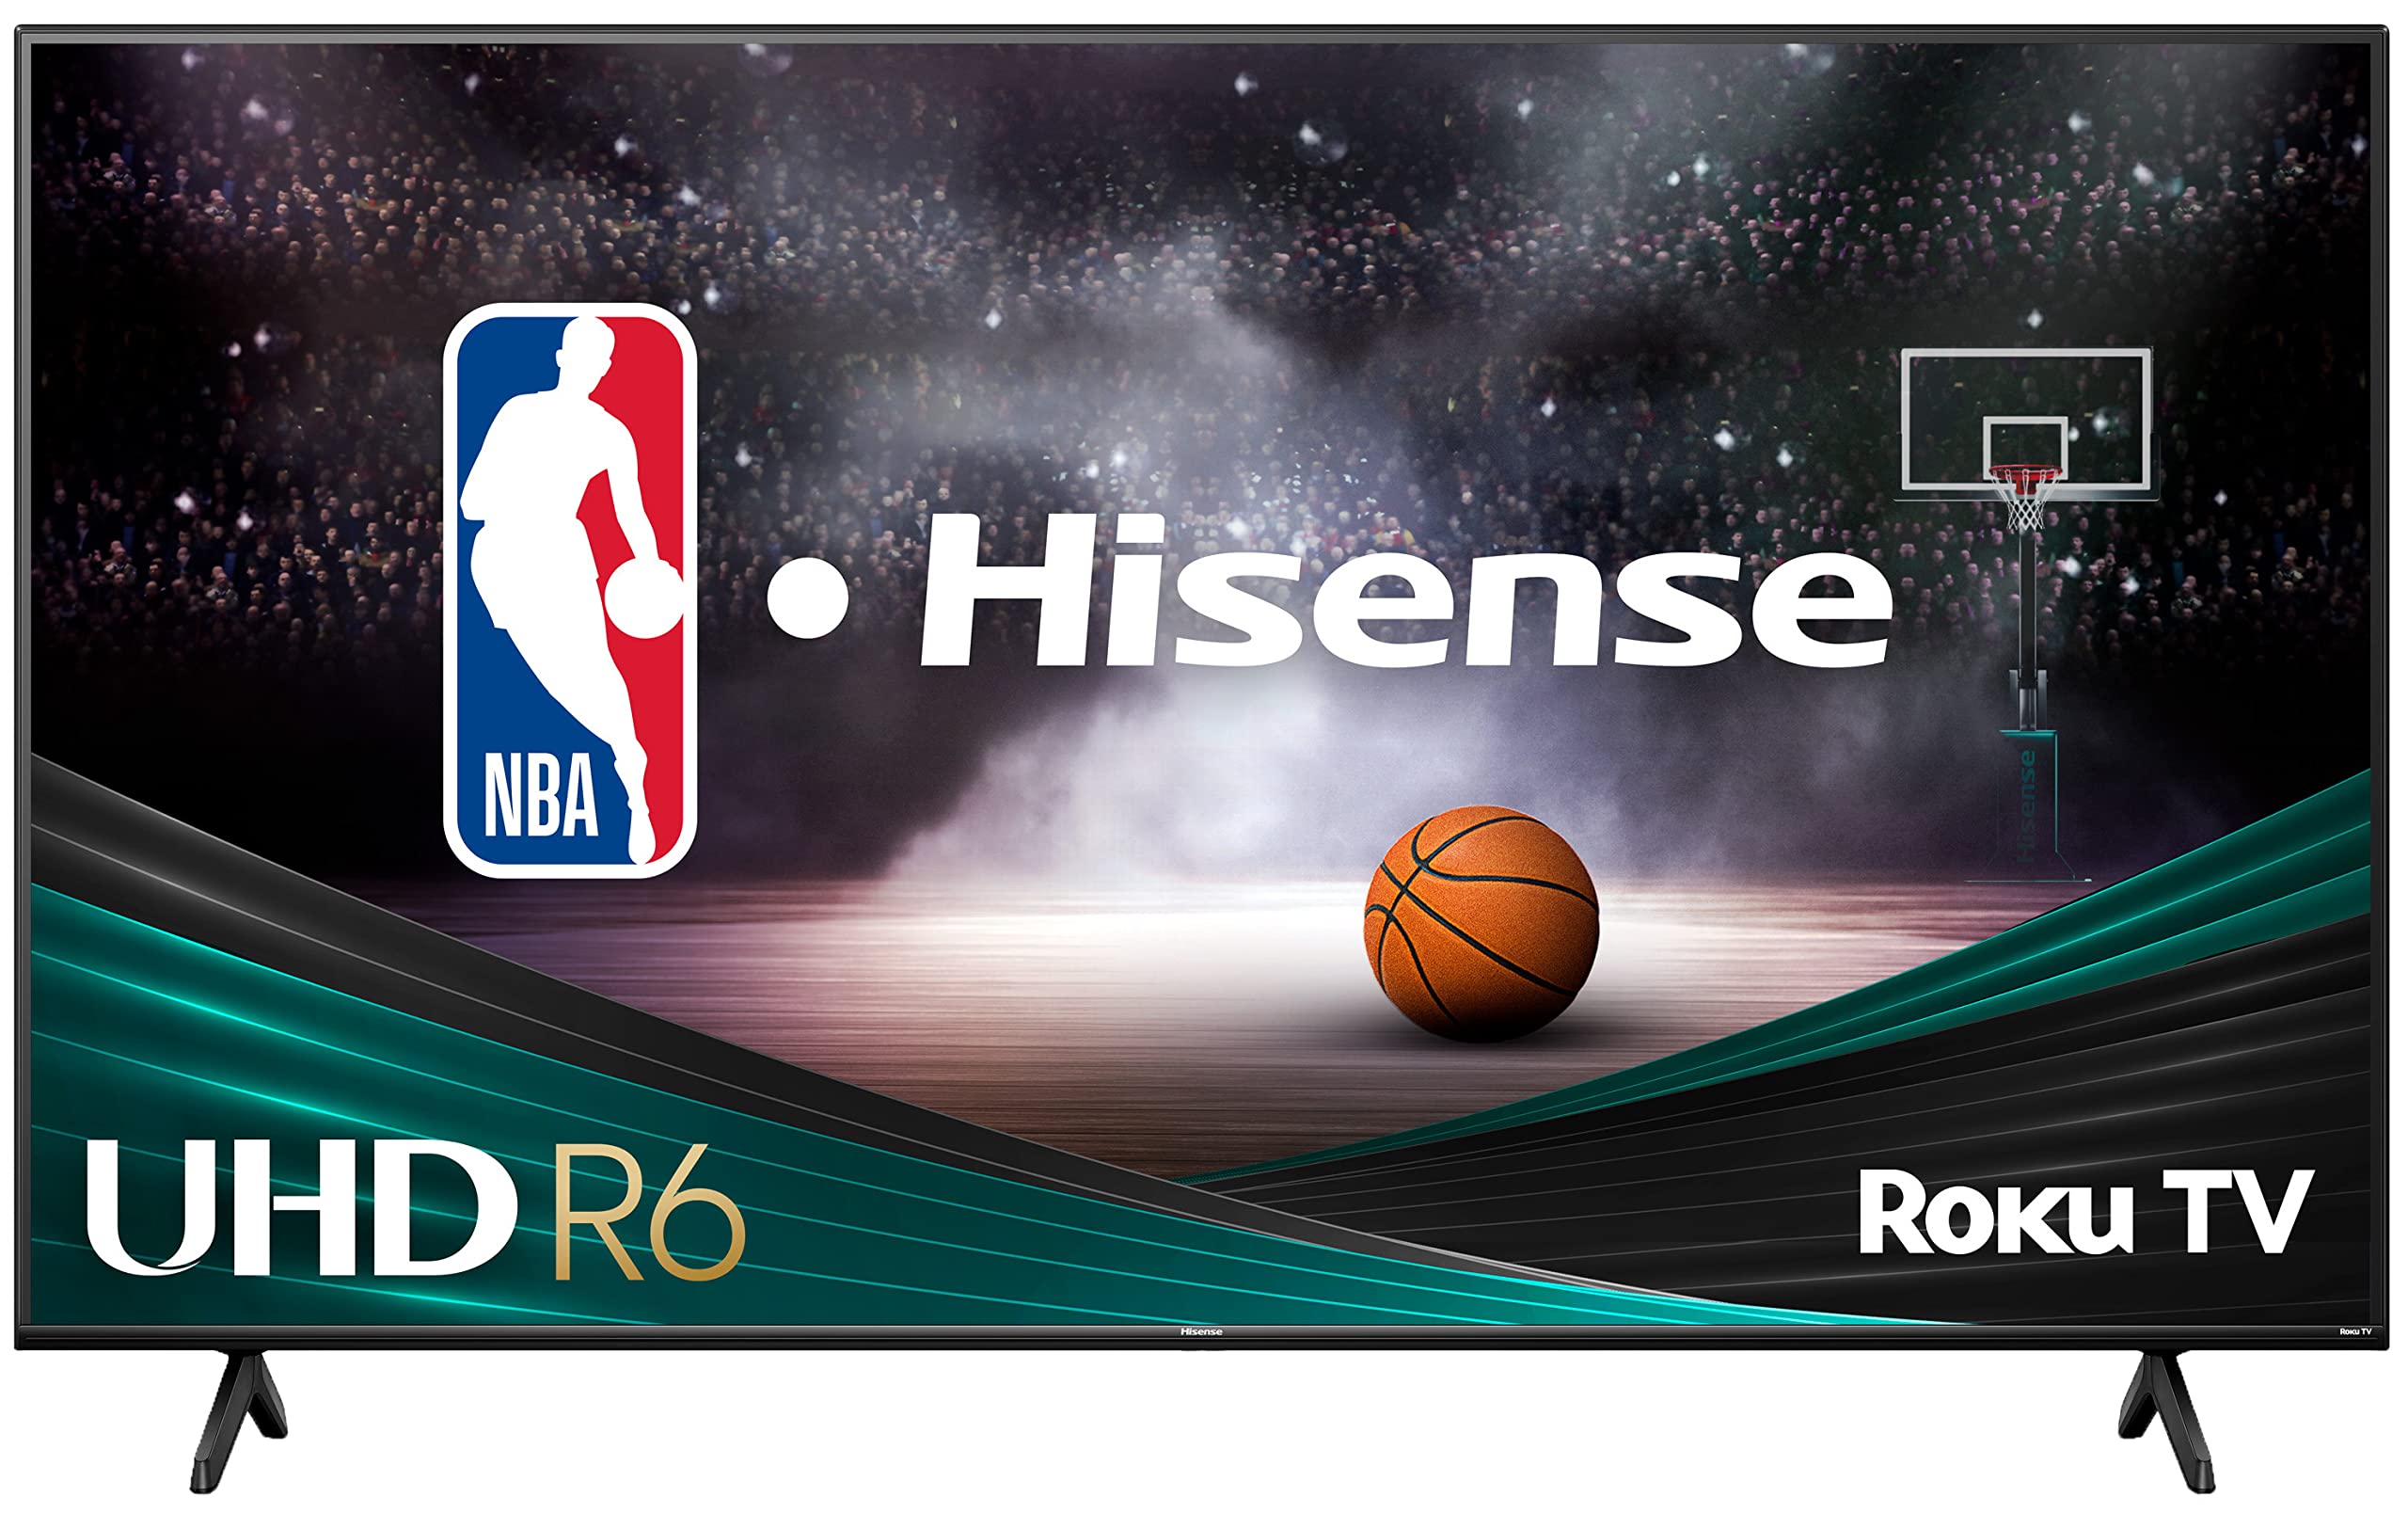 Hisense 65-Inch Class R6 Series 4K UHD Smart Roku TV with Alexa Compatibility, Dolby Vision HDR, DTS Studio Sound, Game Mode (65R6G)